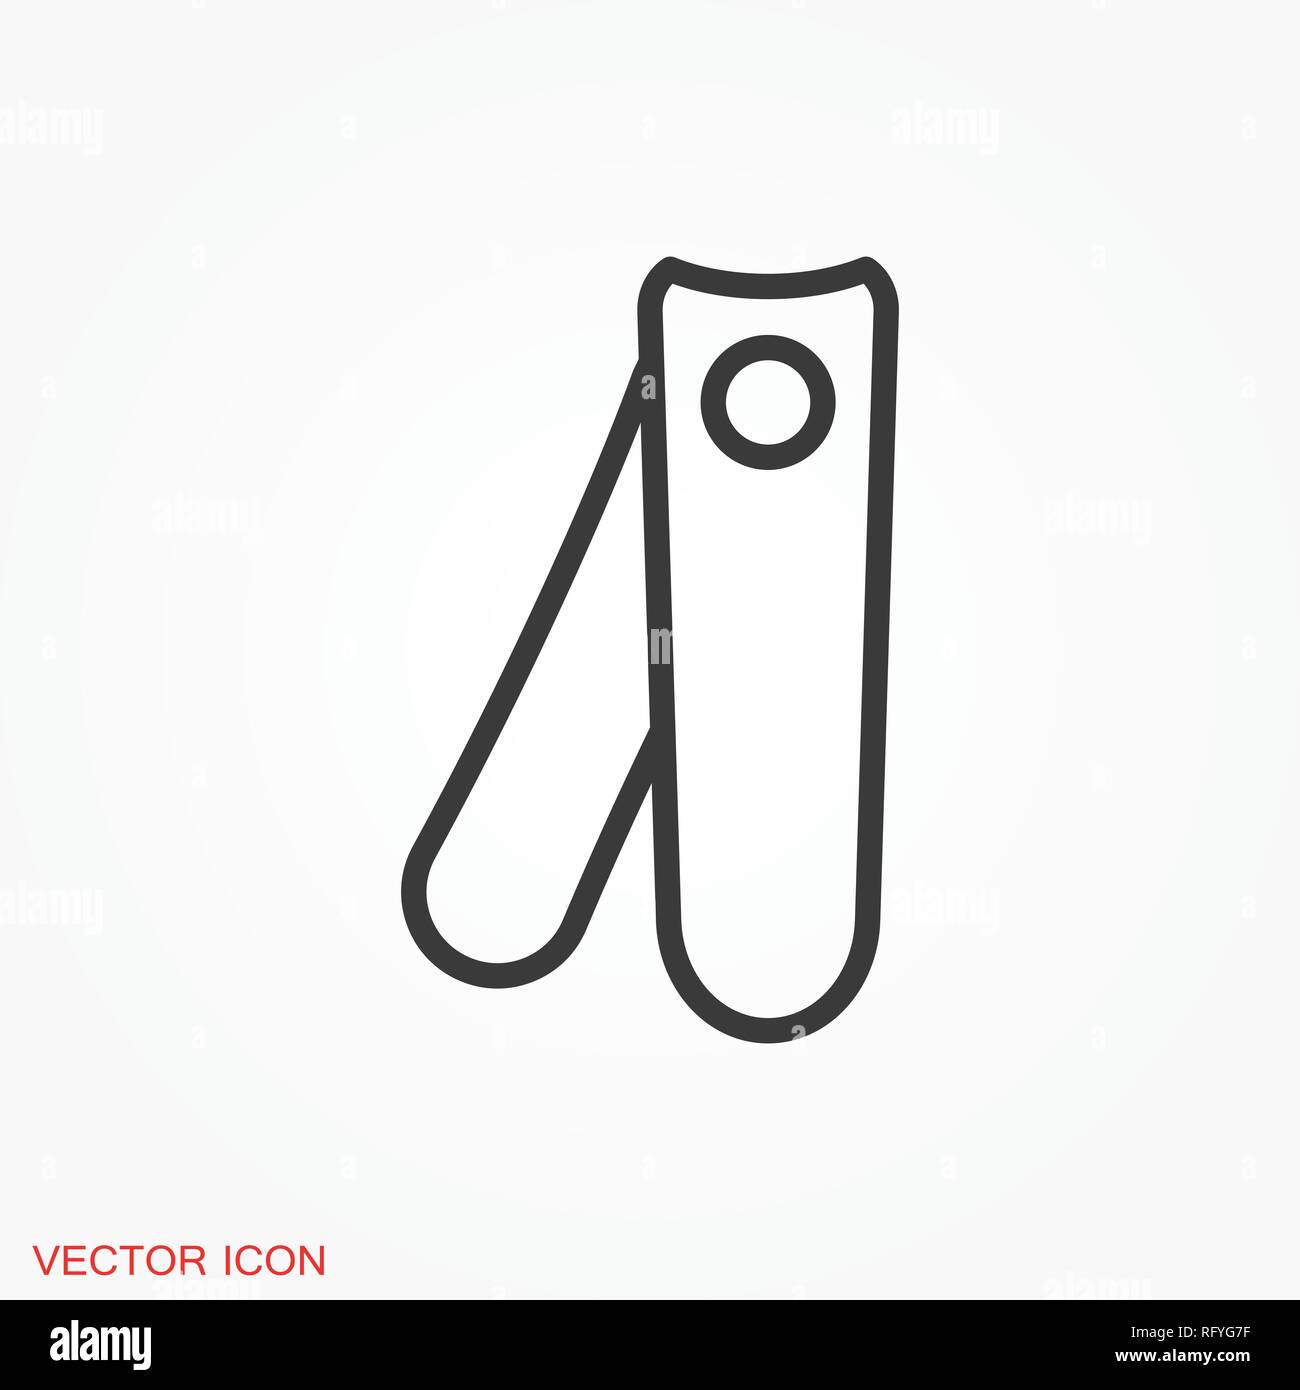 Nail Clippers Linear Icon Thin Line Stock Vector (Royalty Free) 552597895 |  Shutterstock